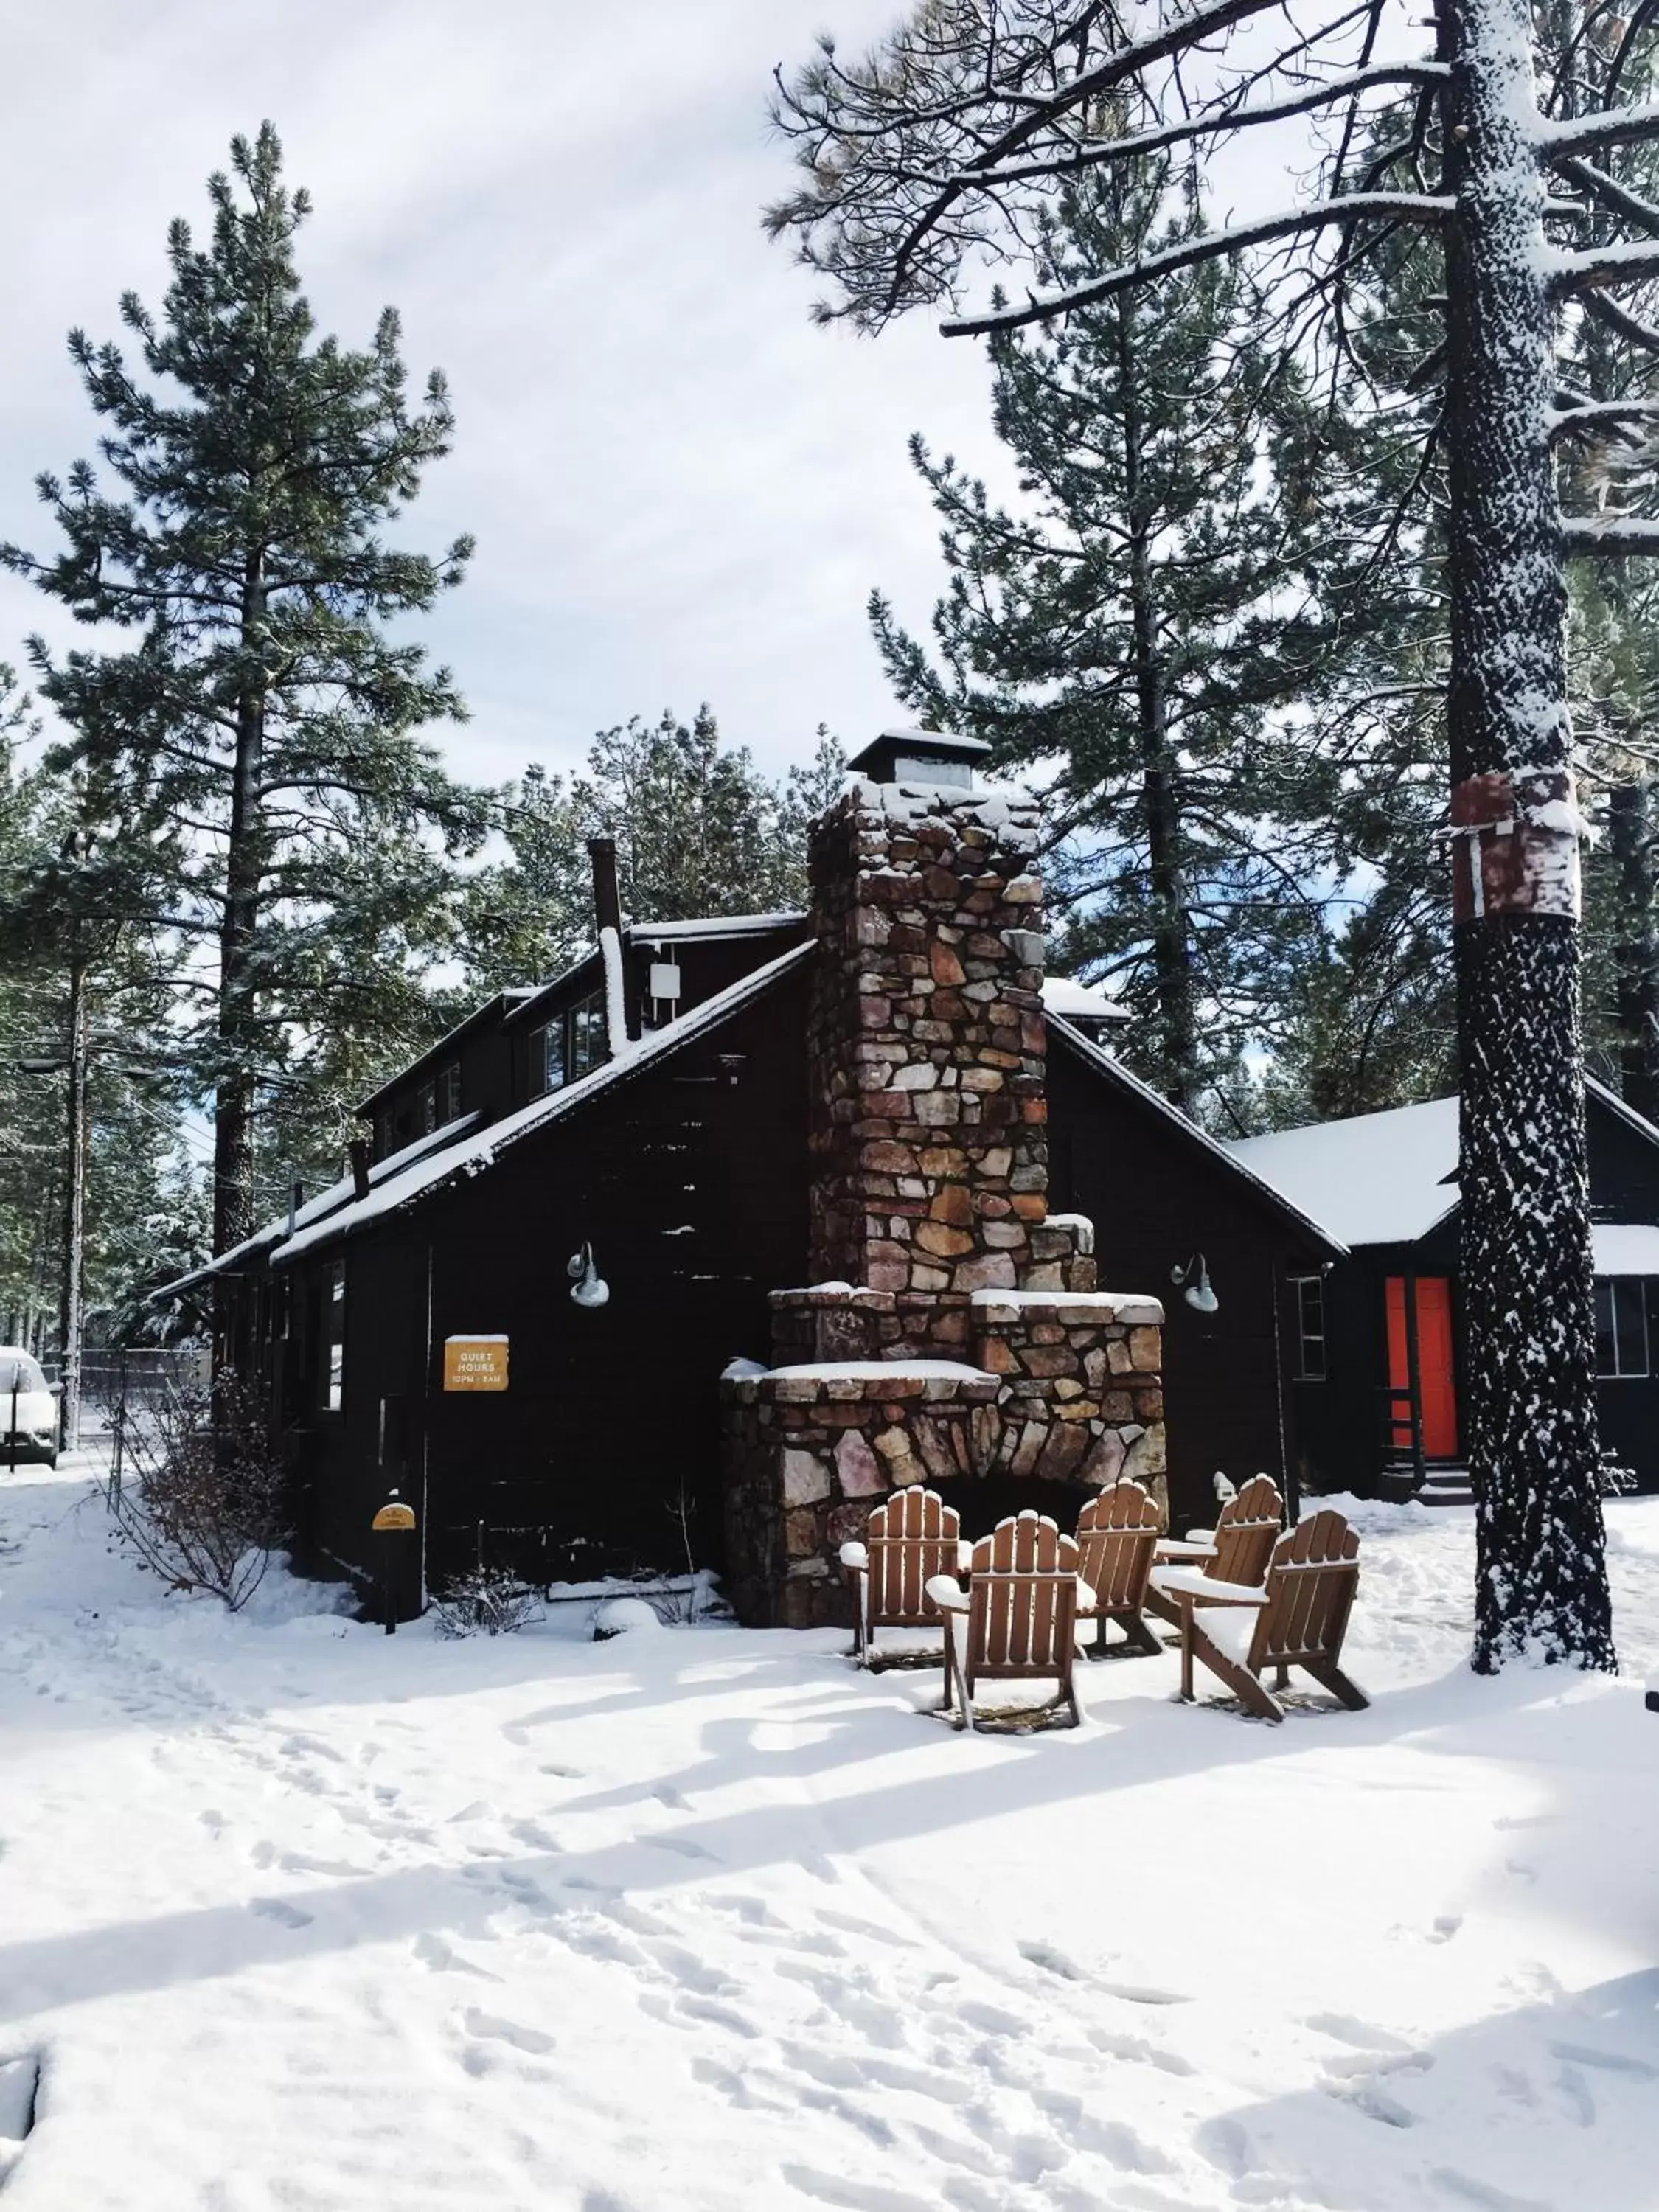 Property building, Winter in Noon Lodge